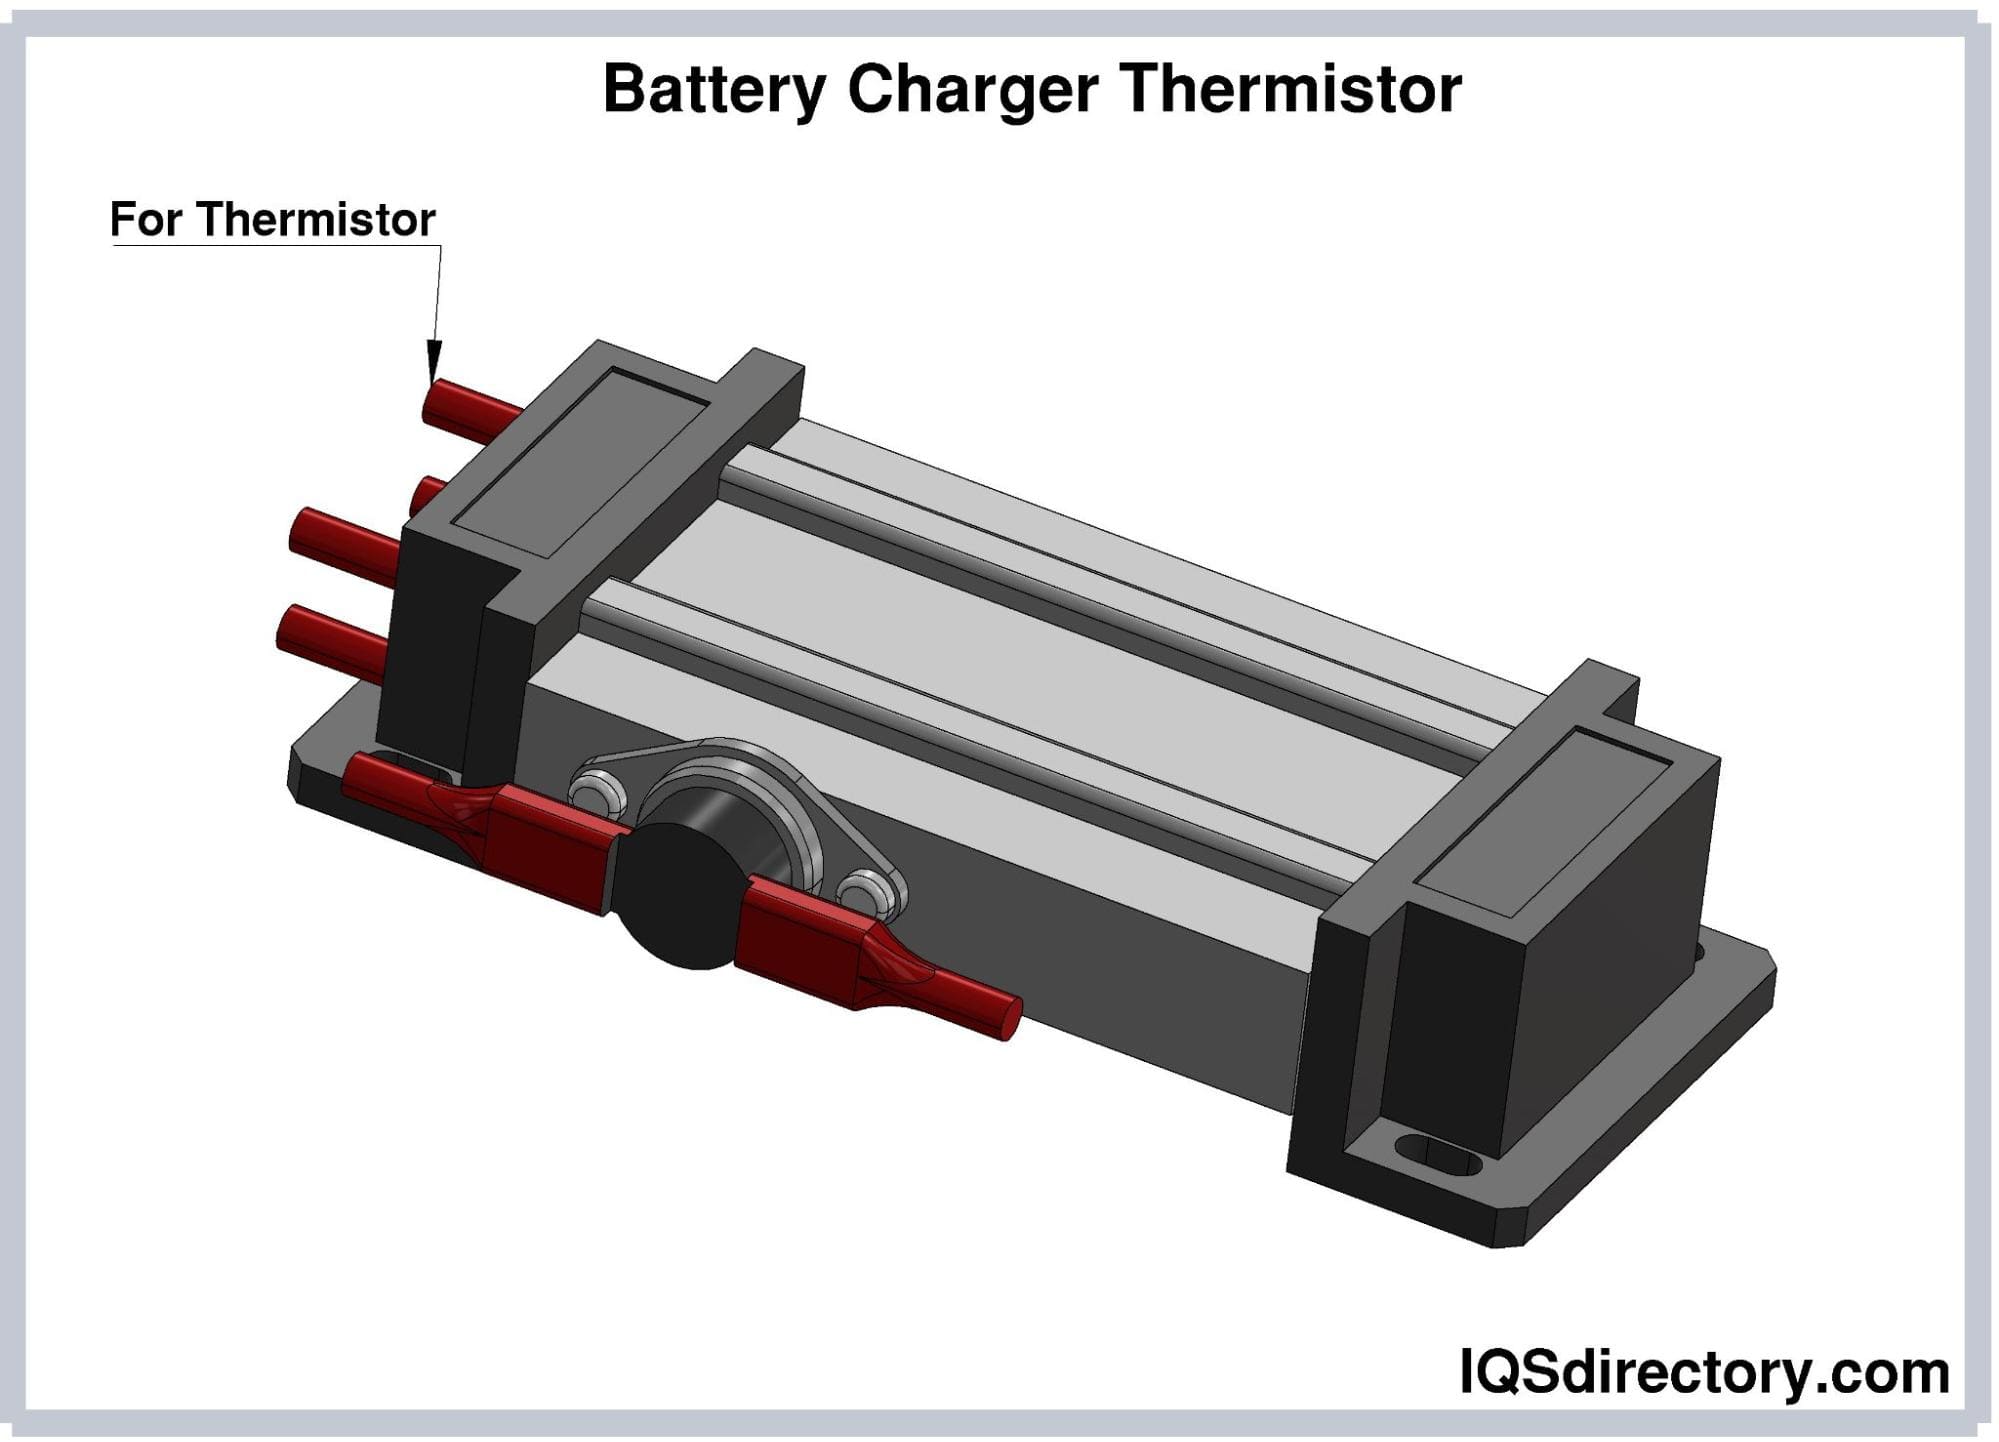 Battery Charger Thermistor